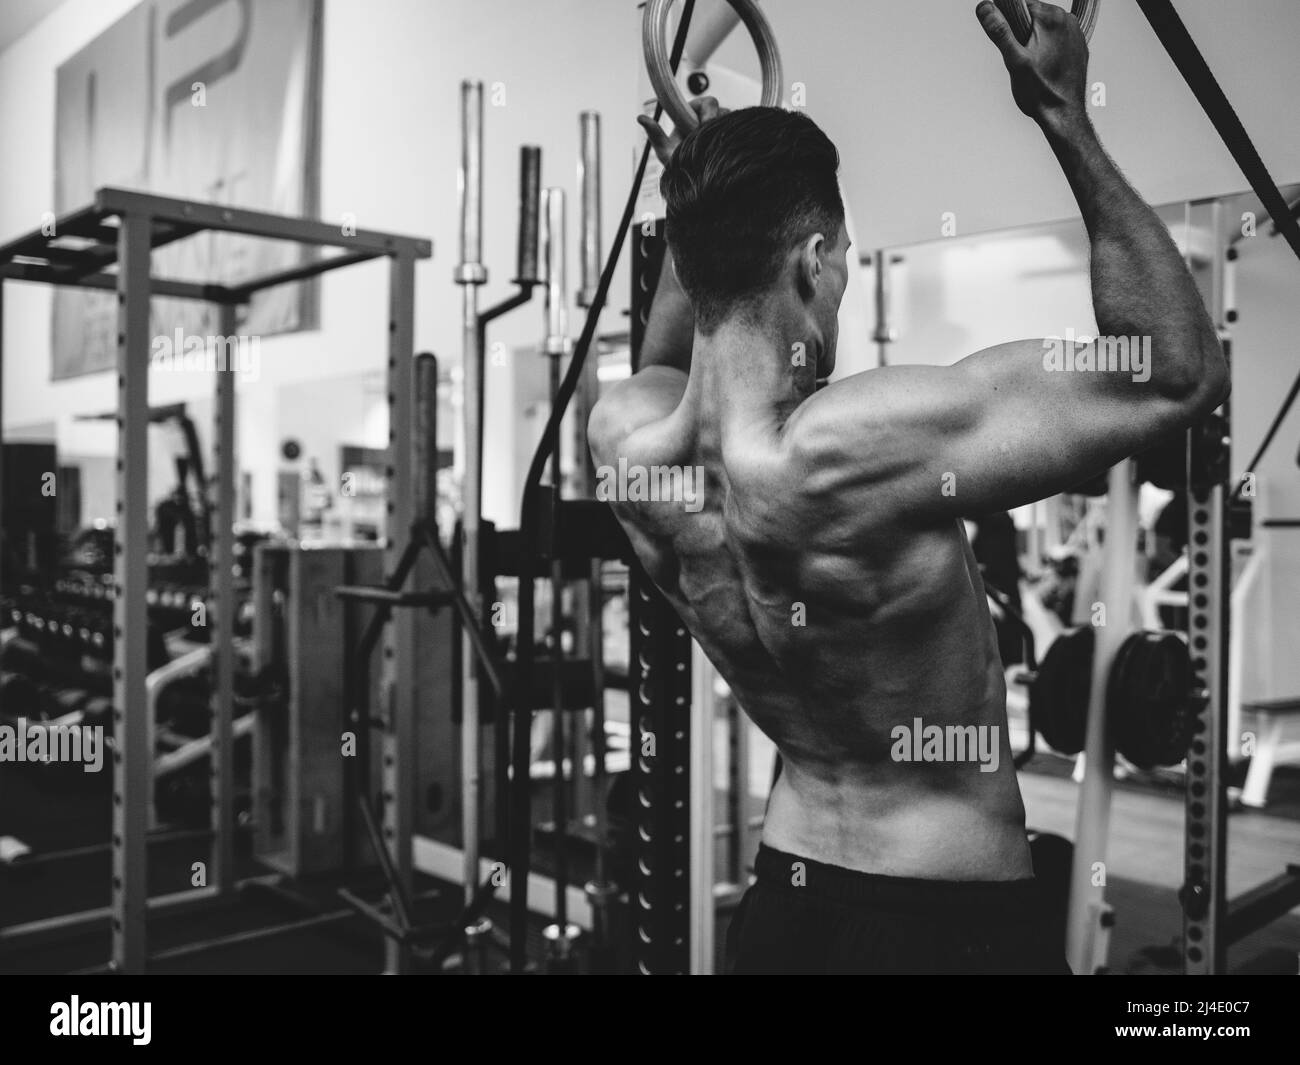 City Of London, London, UK - September 10, 2014: A man works out in a generic gym. He has a well-defined body. Stock Photo